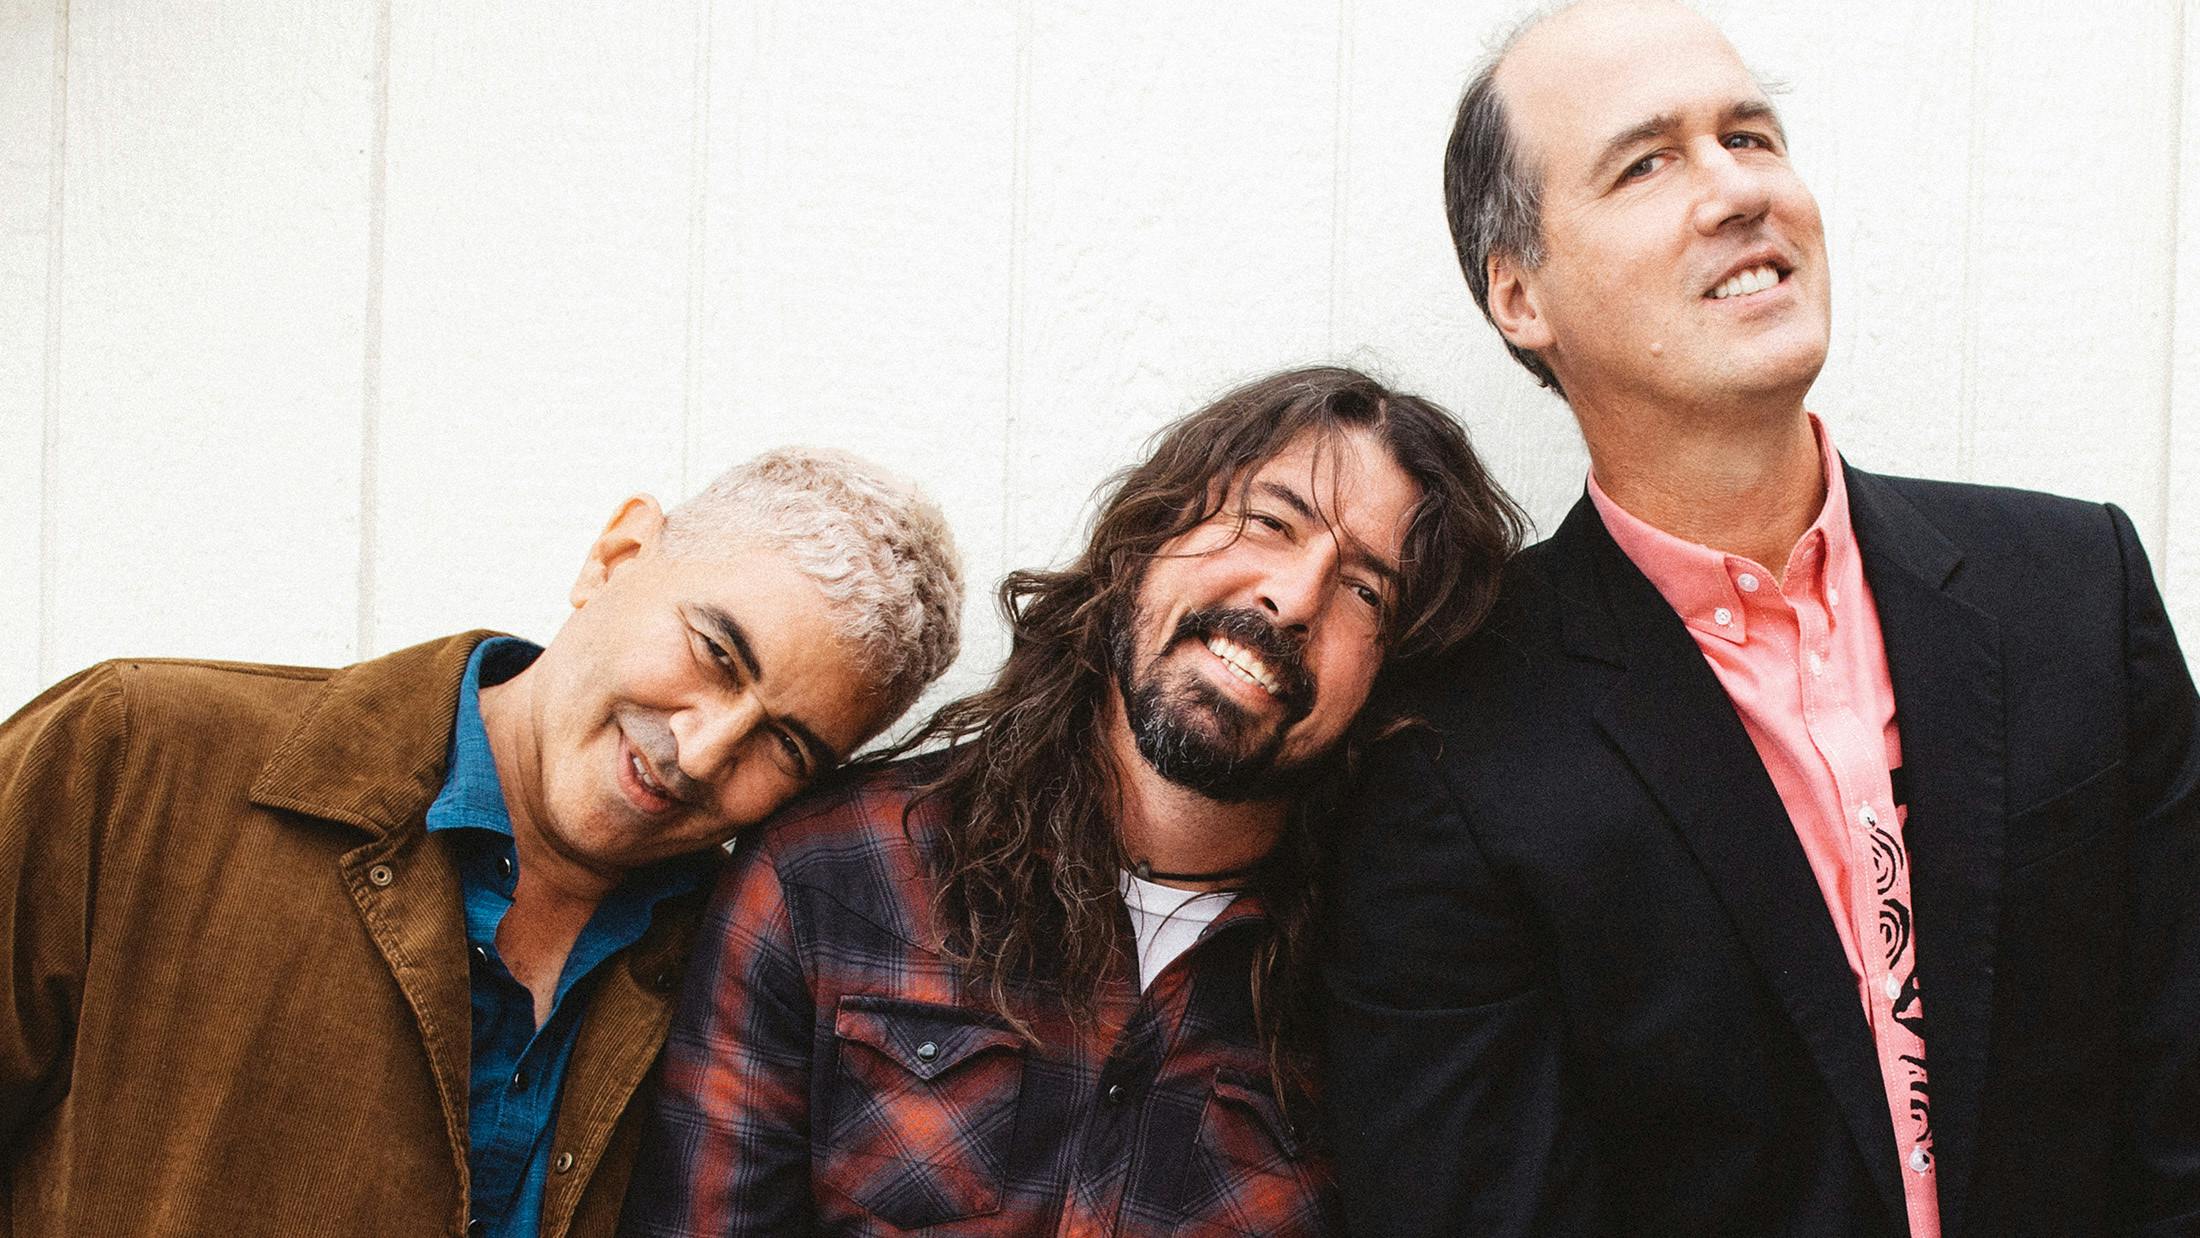 Dave Grohl: Nirvana members still jam and record "really cool" music together